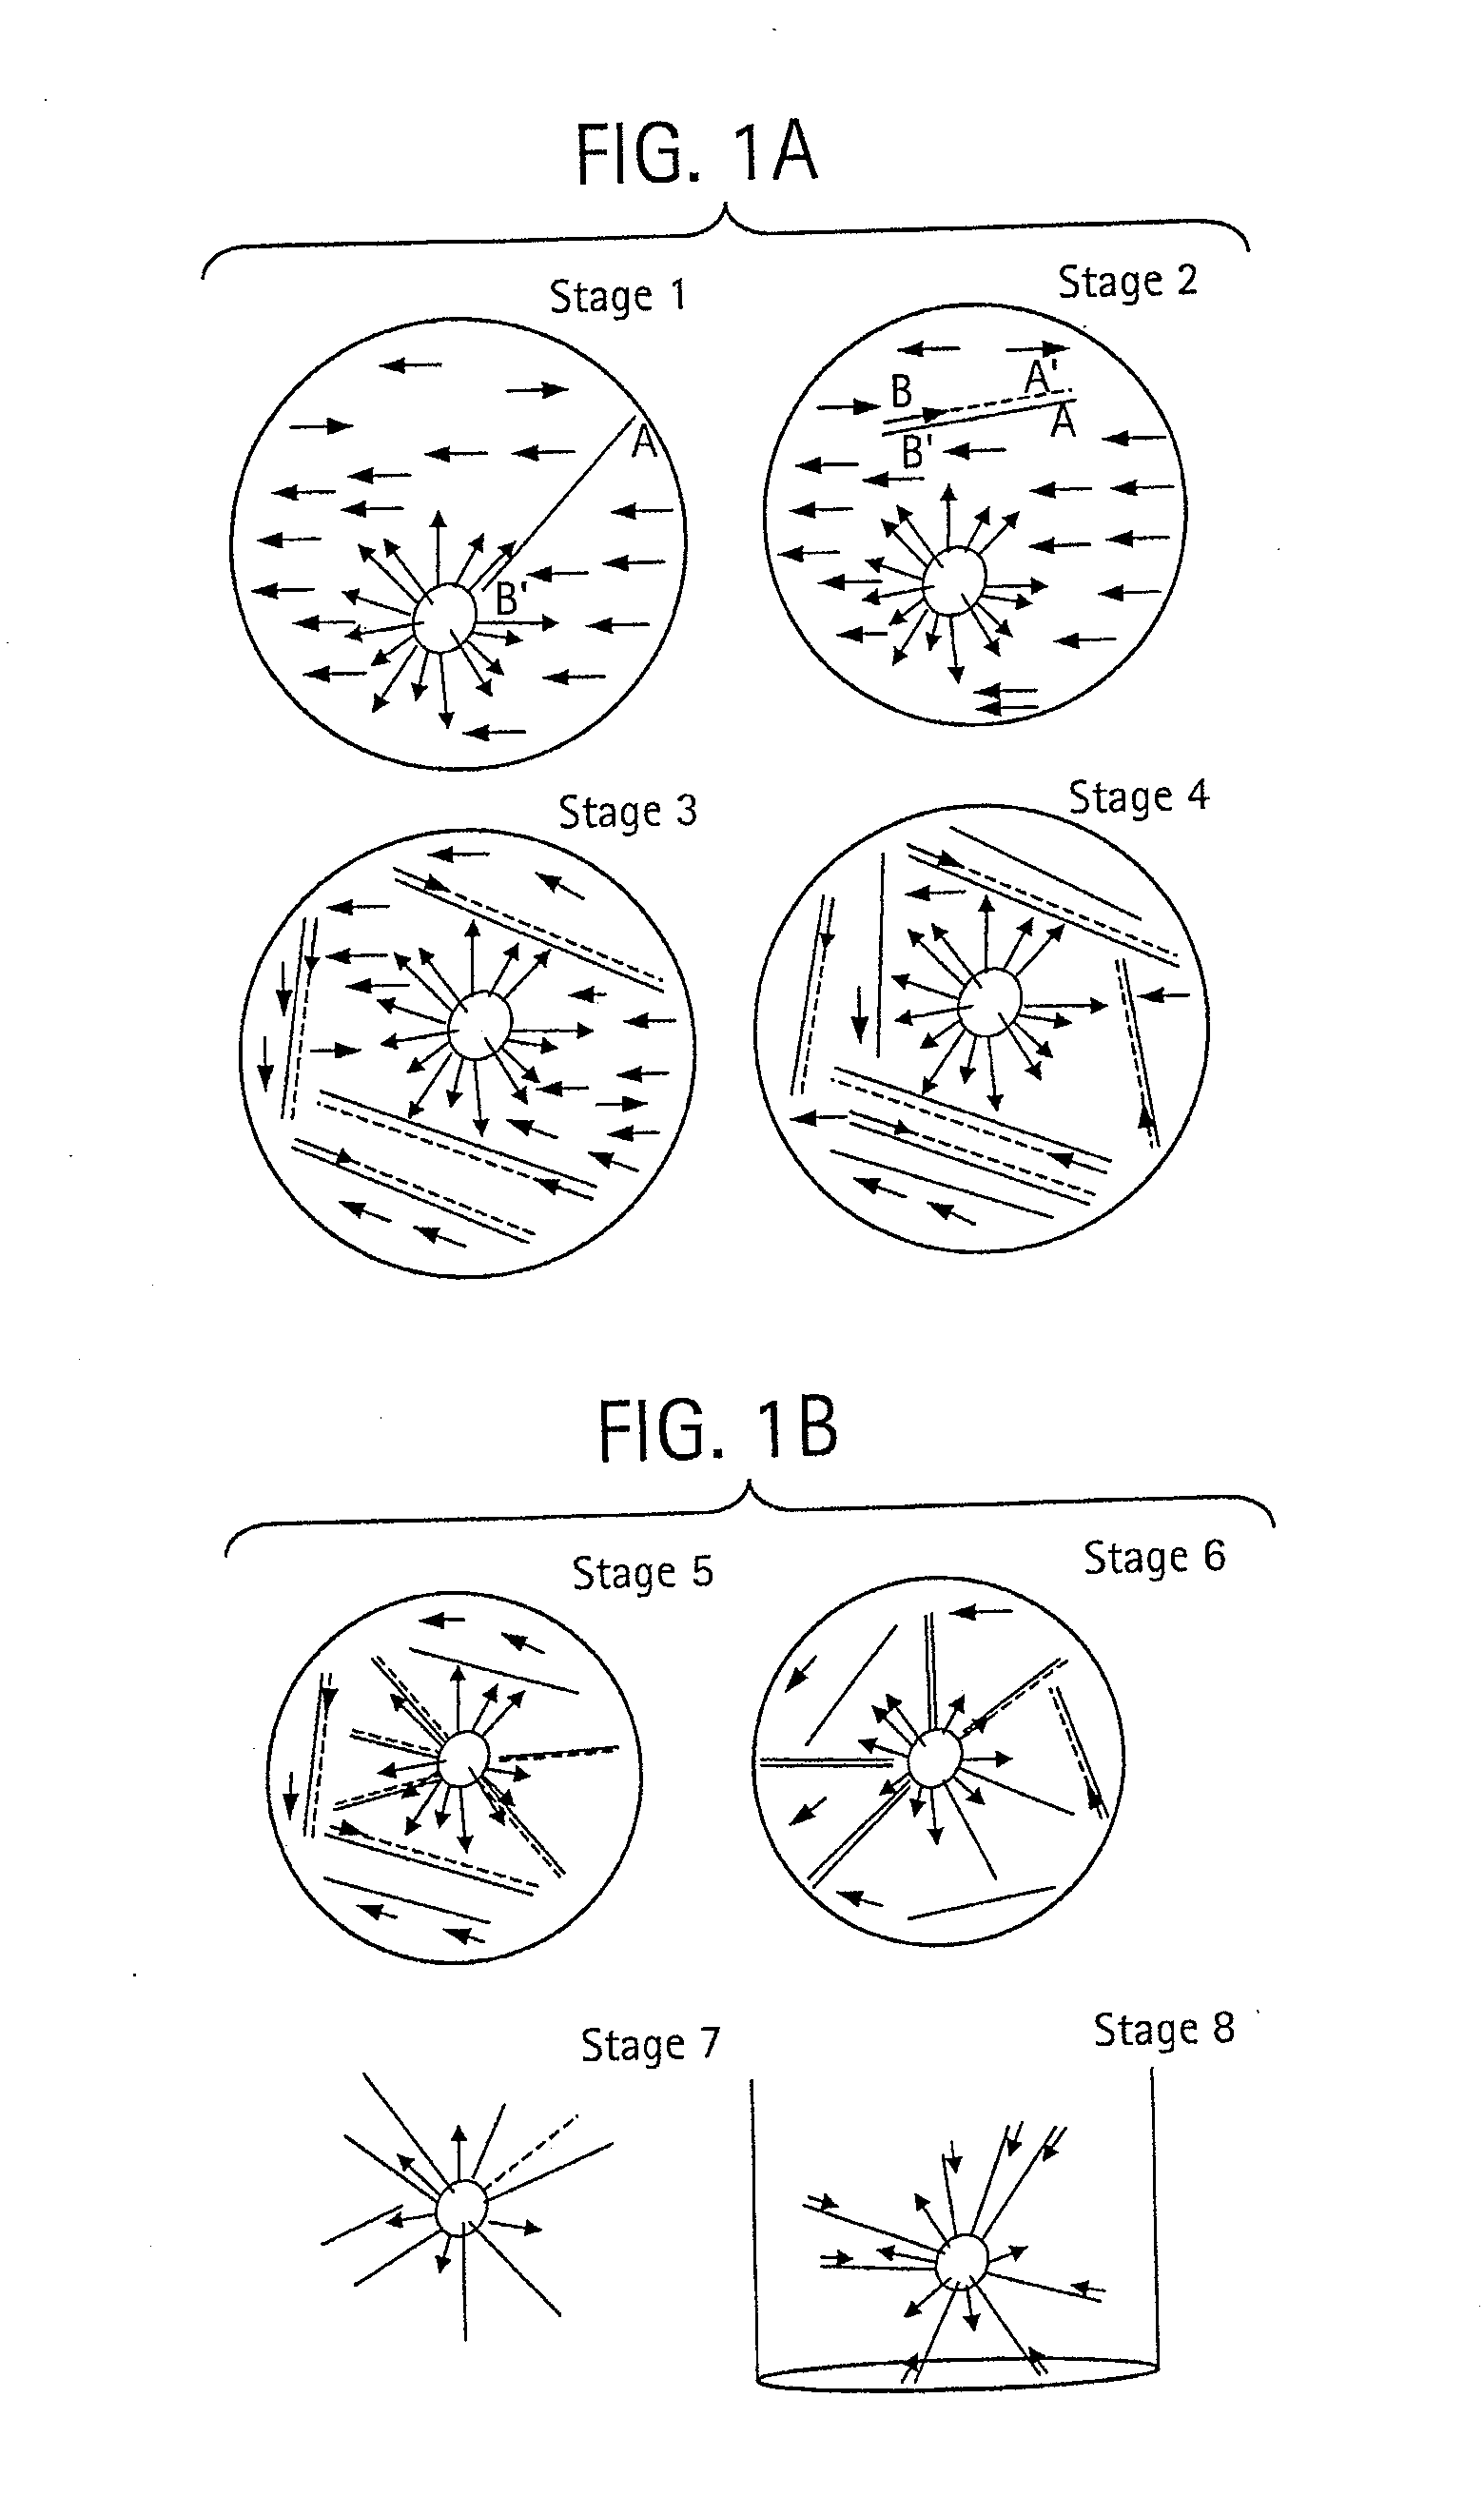 Methods for Determining Sequence Variants Using Ultra-Deep Sequencing